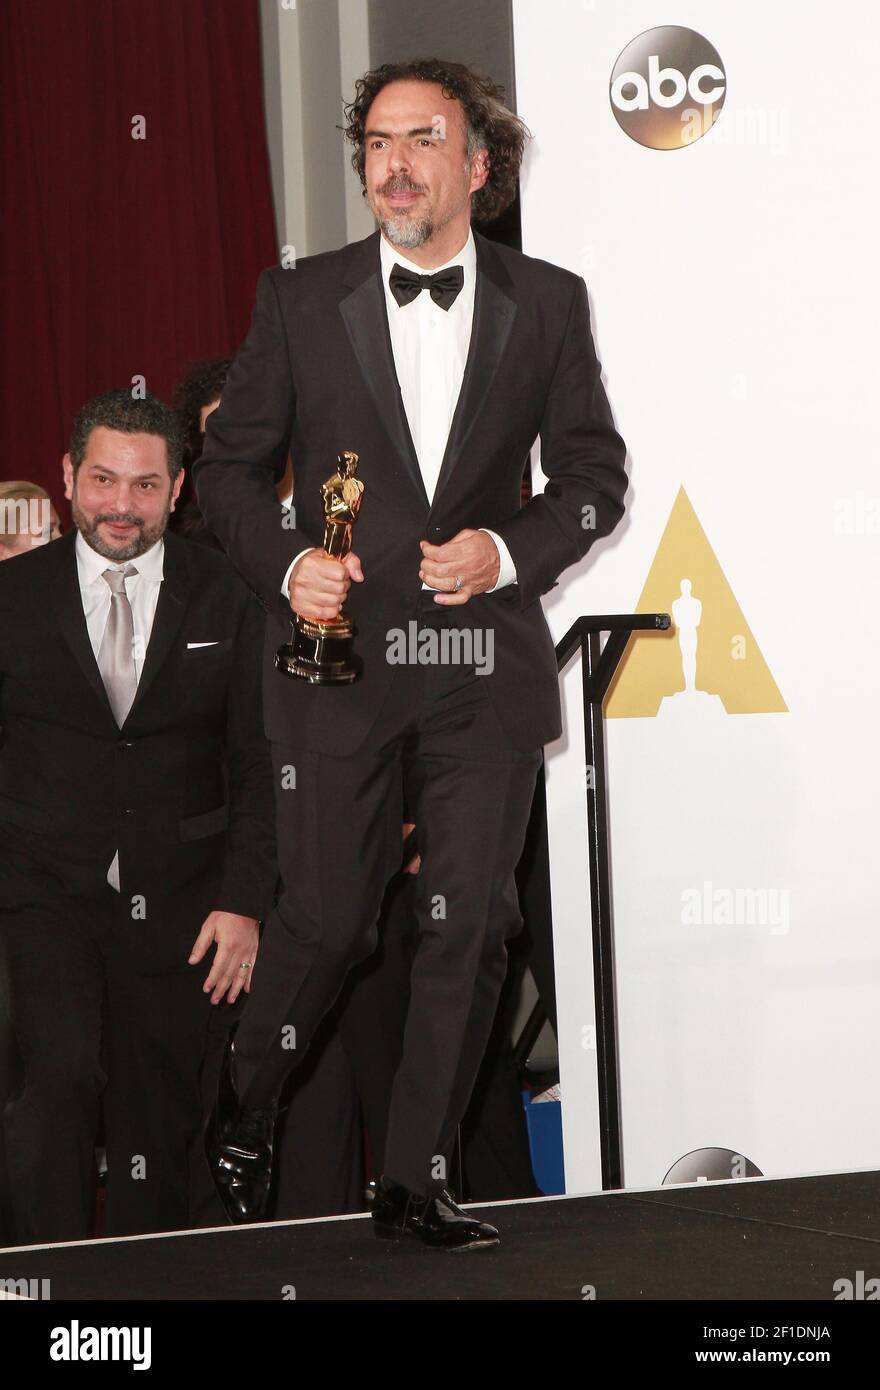 22 February 2015 - Hollywood, California - (L-R) Producer/ Director Alejandro G. Inarritu, winner of Best Original Screenplay, Best Director, and Best Motion Picture, for 'Birdman' poses in the press room during the 87th Annual Academy Awards presented by the Academy of Motion Picture Arts and Sciences held at the Dolby Theatre. Photo Credit: Theresa Bouche/AdMedia/Sipa USA Stock Photo